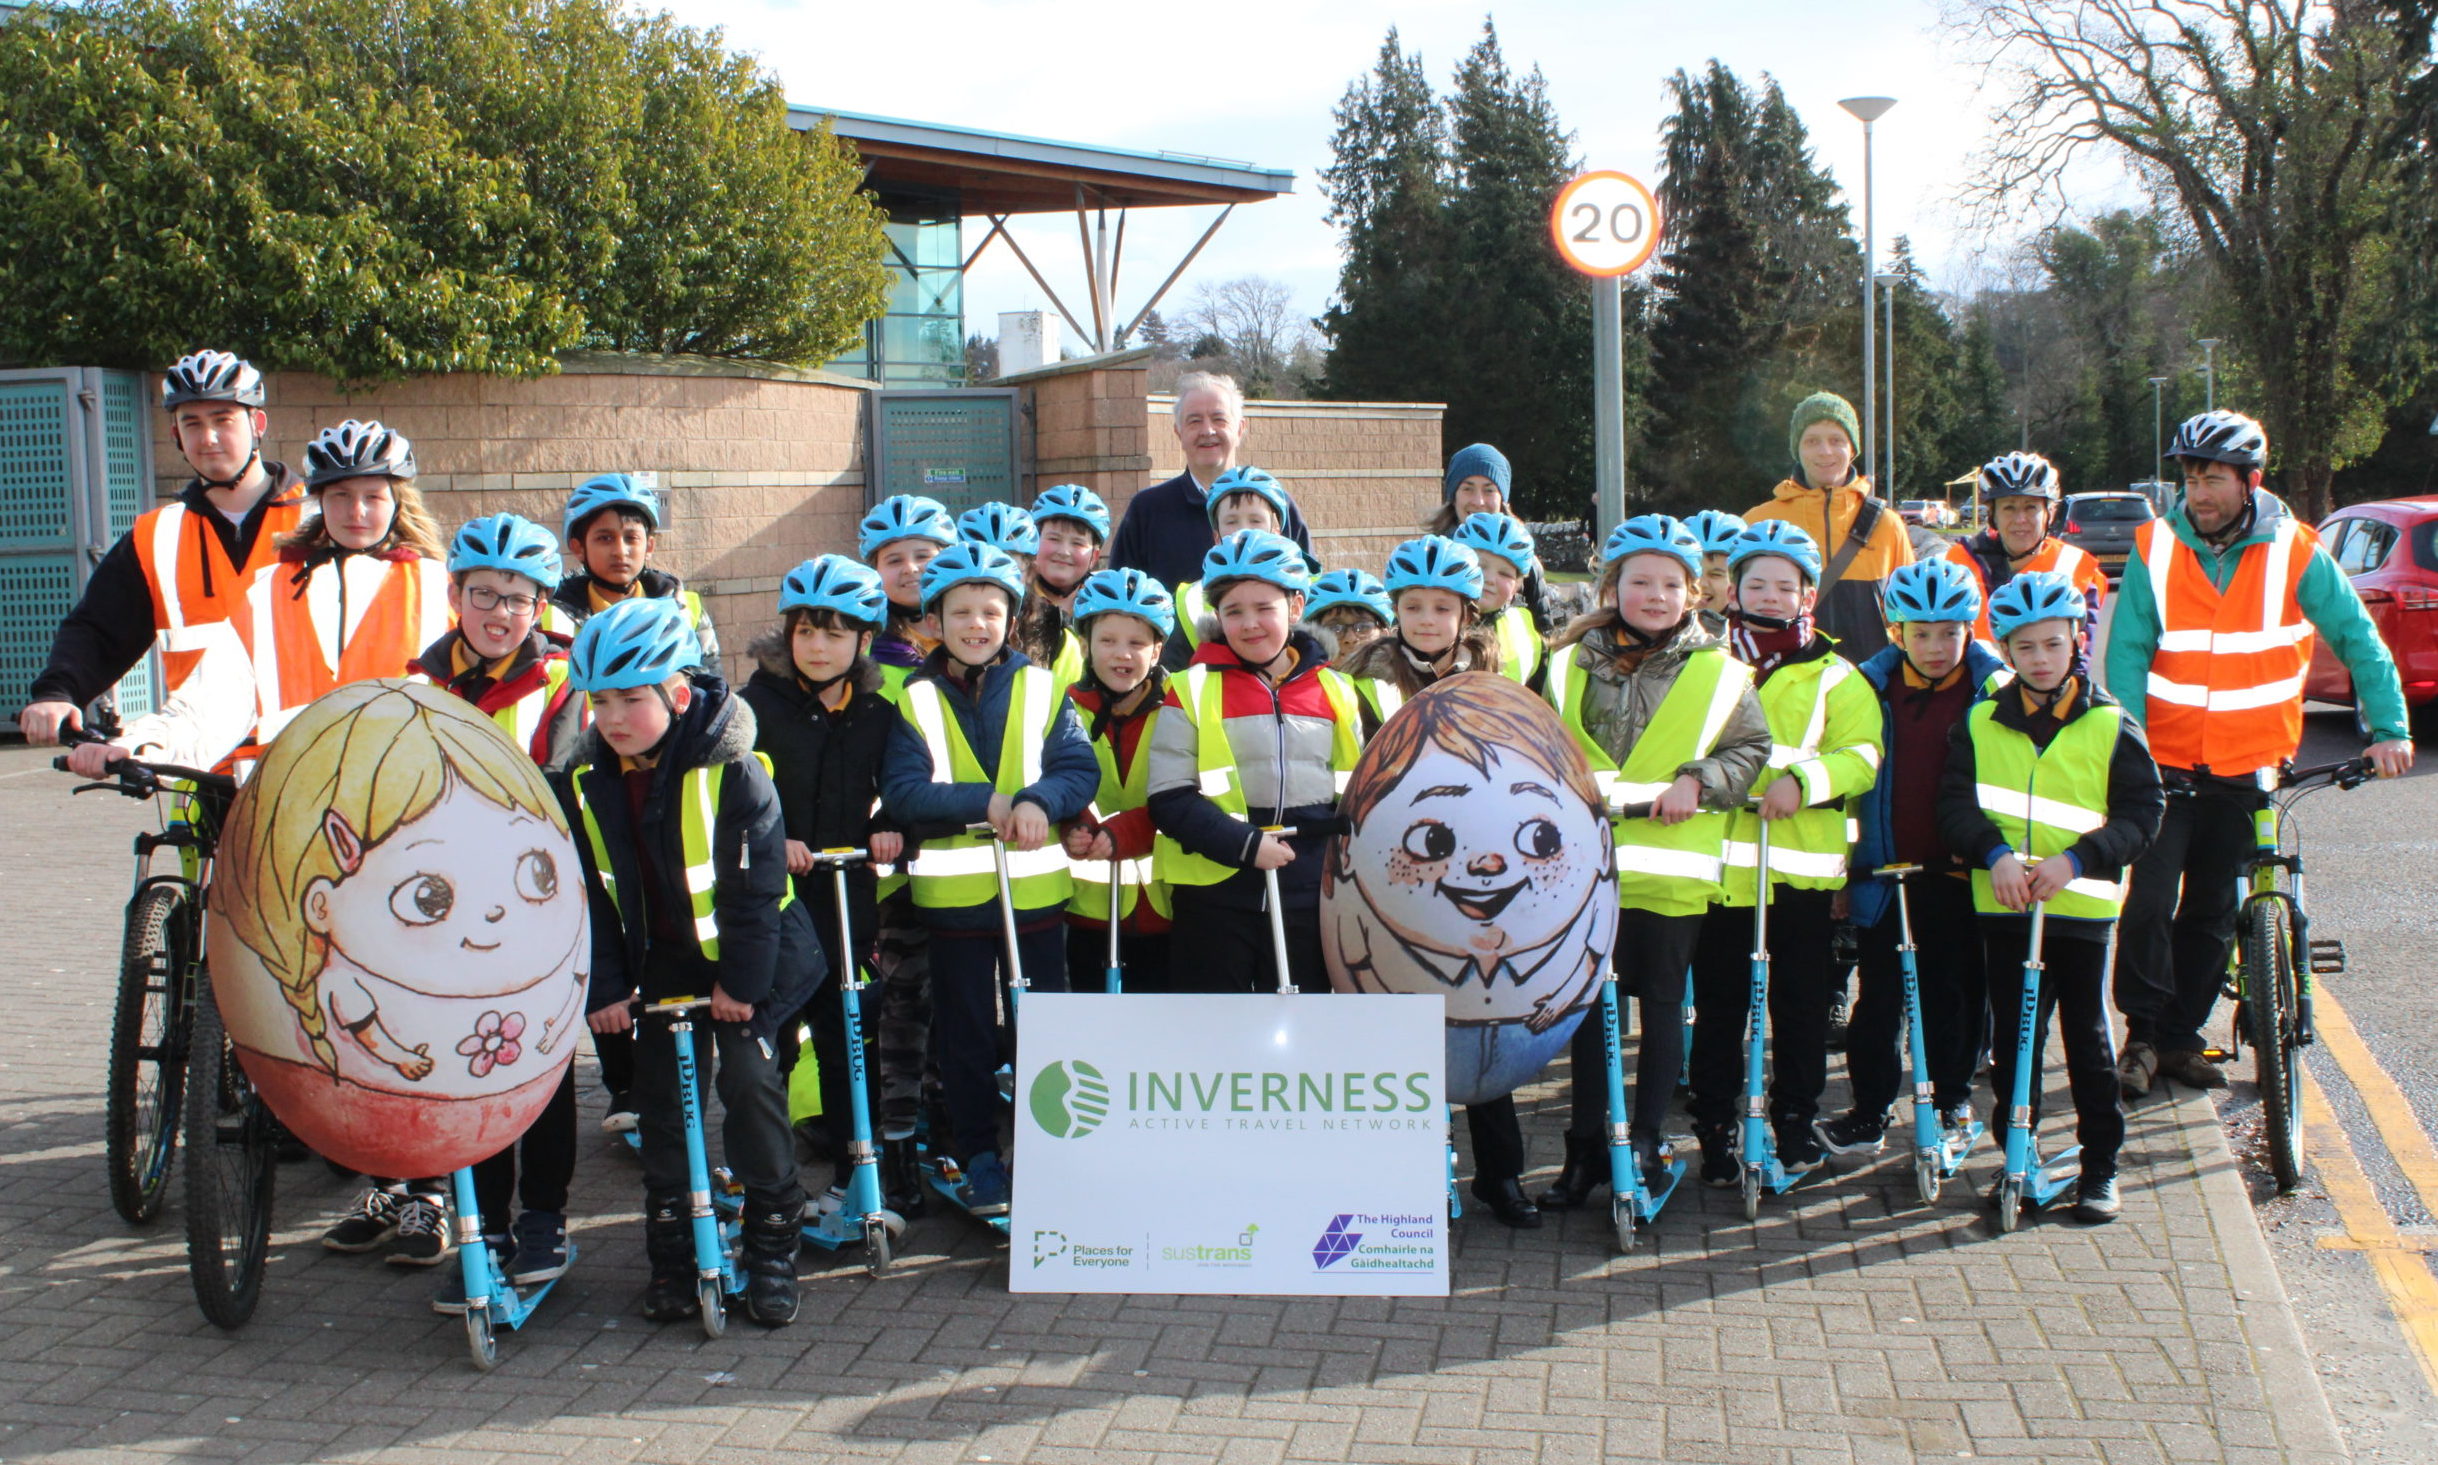 Councillor Alex Graham joined pupils from Central Primary School and Inverness High School today at the Inverness Leisure Centre.